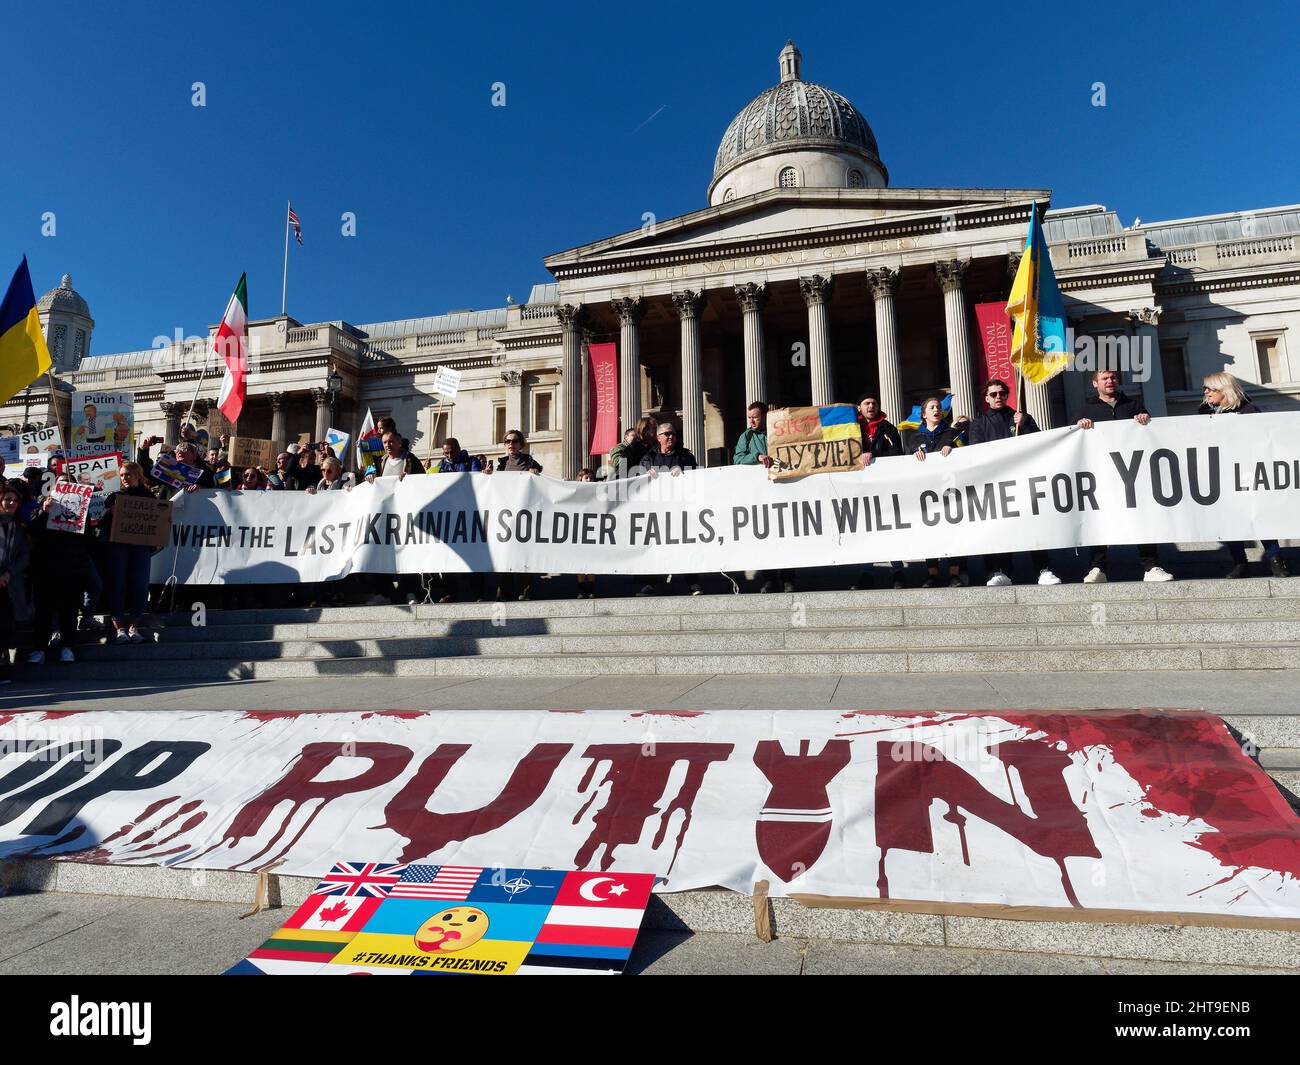 View of anti-Putin and anti-Russian banners in front of the National Gallery in Trafalgar Square London to protest at the Russian invasion of Ukraine Stock Photo